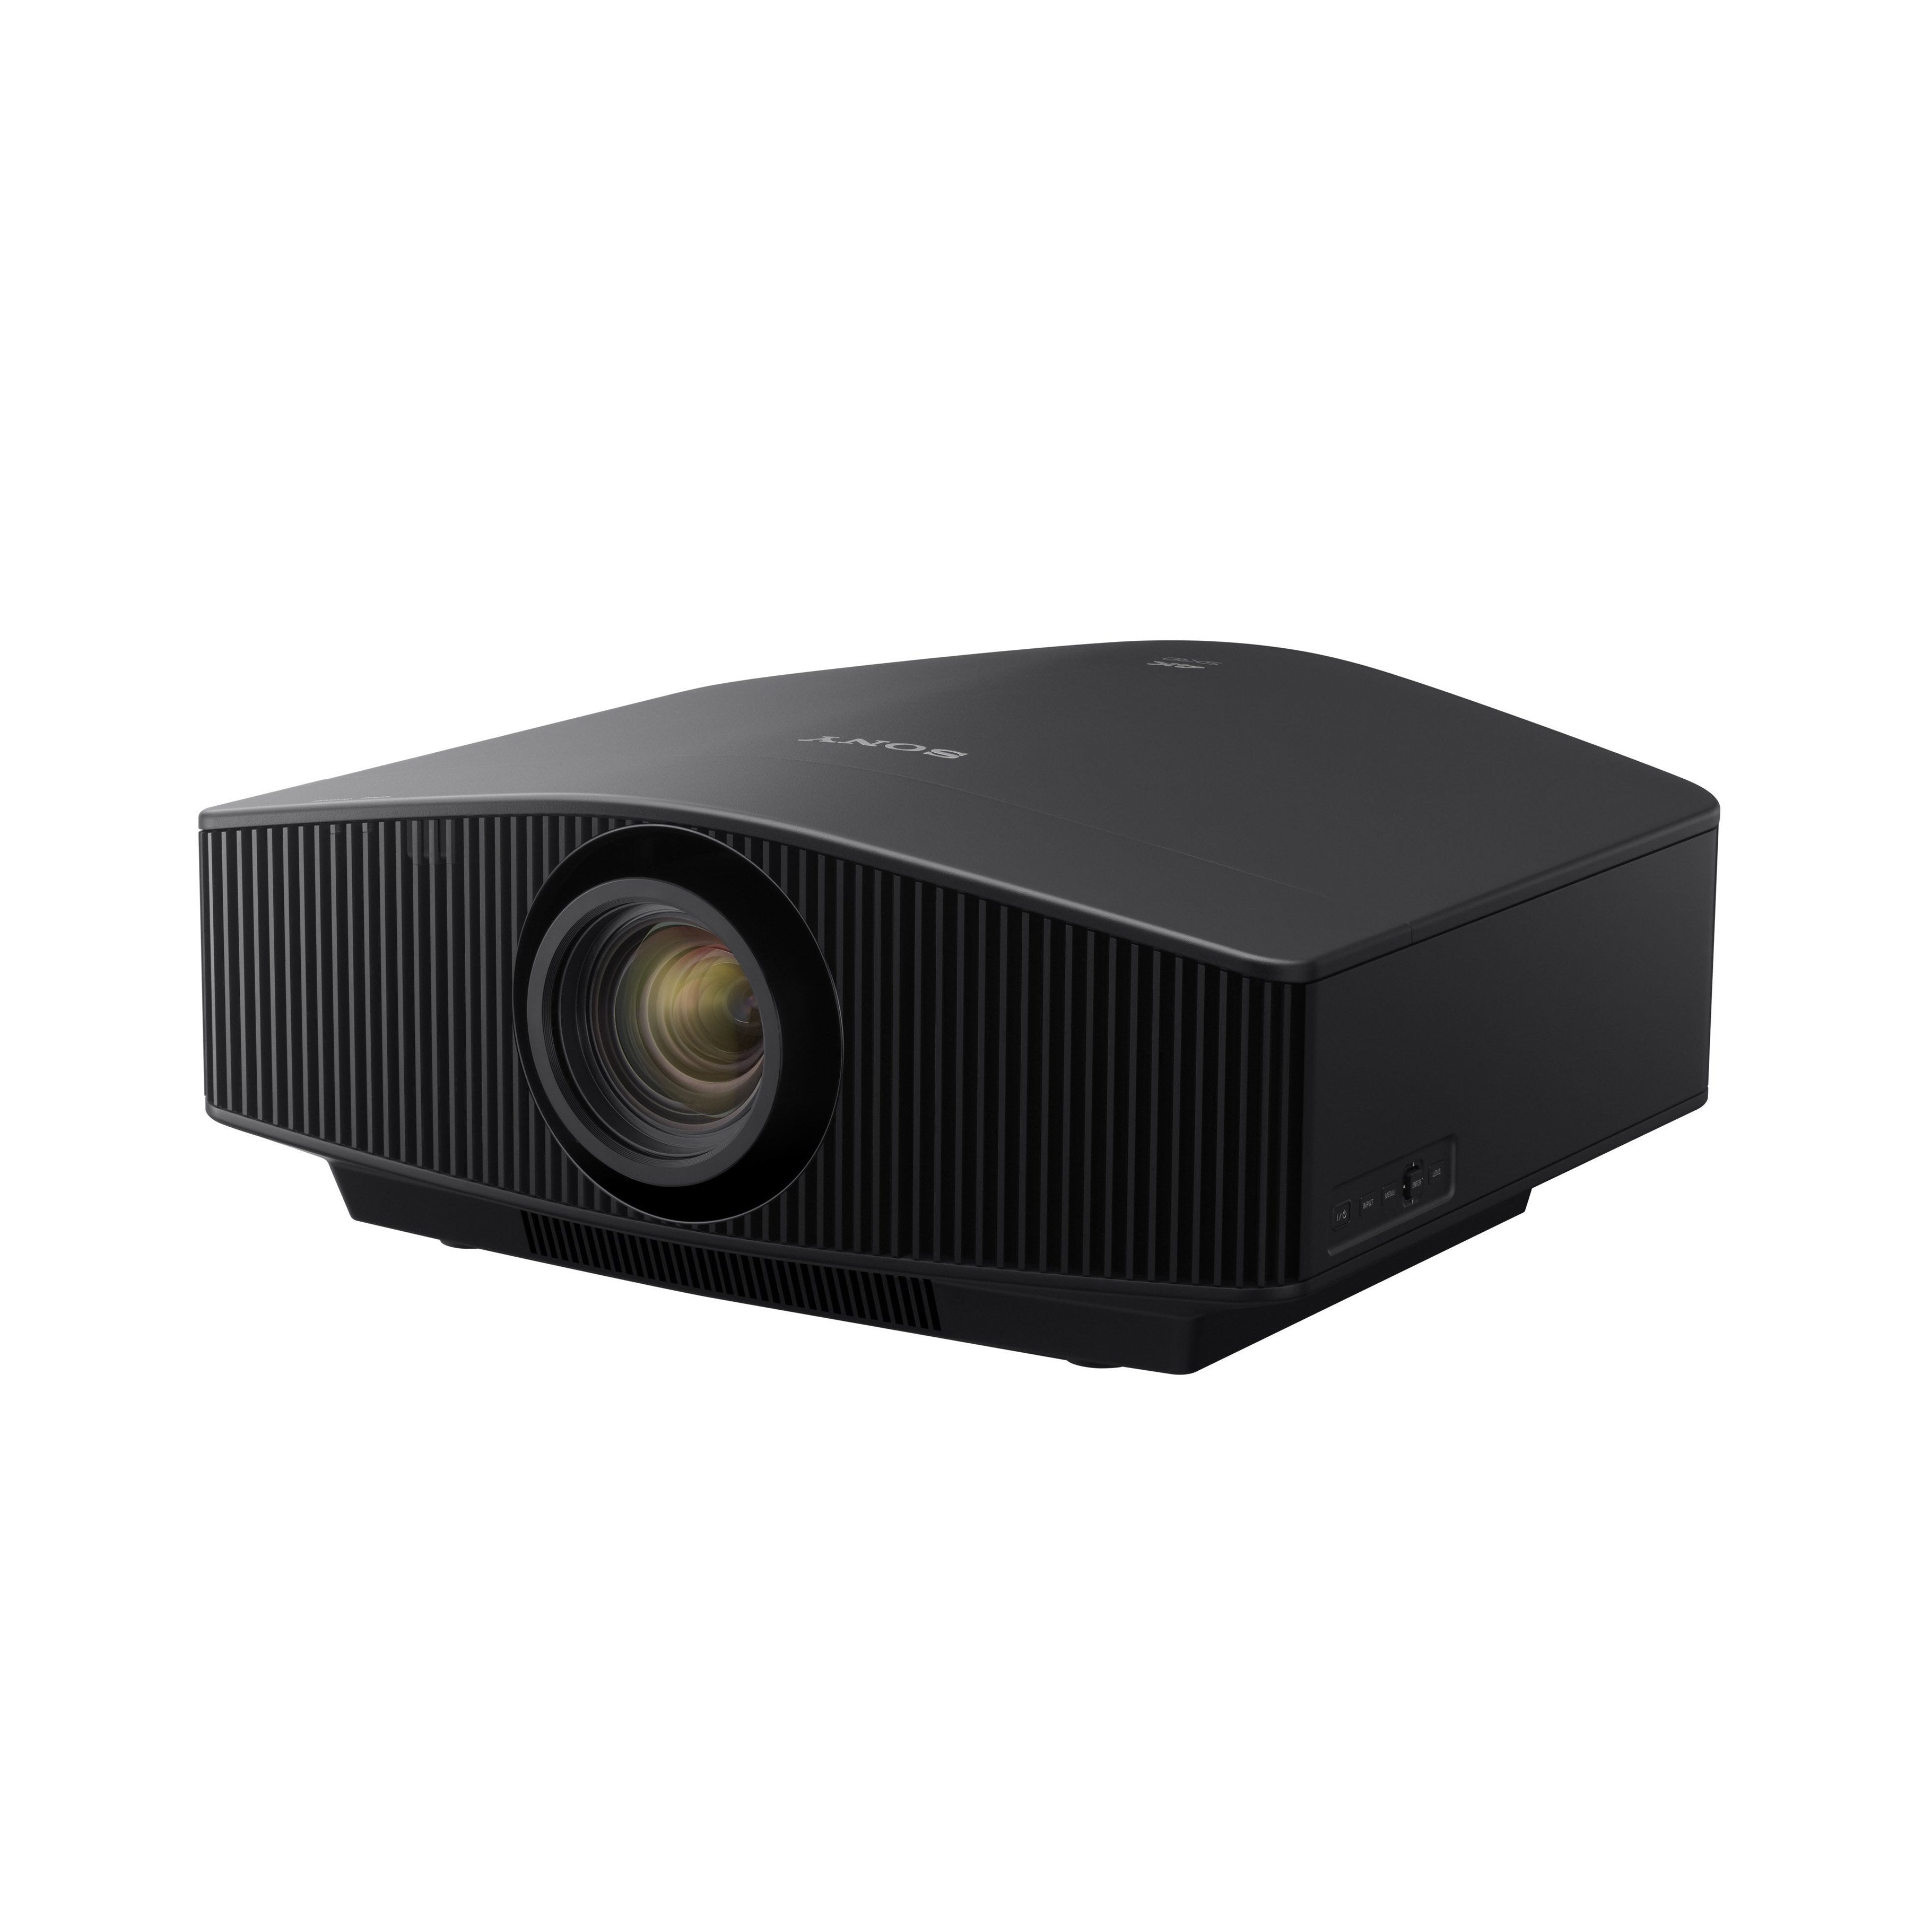 Sony VPL-VW995ES 4K HDR Laser Home Theater Projector